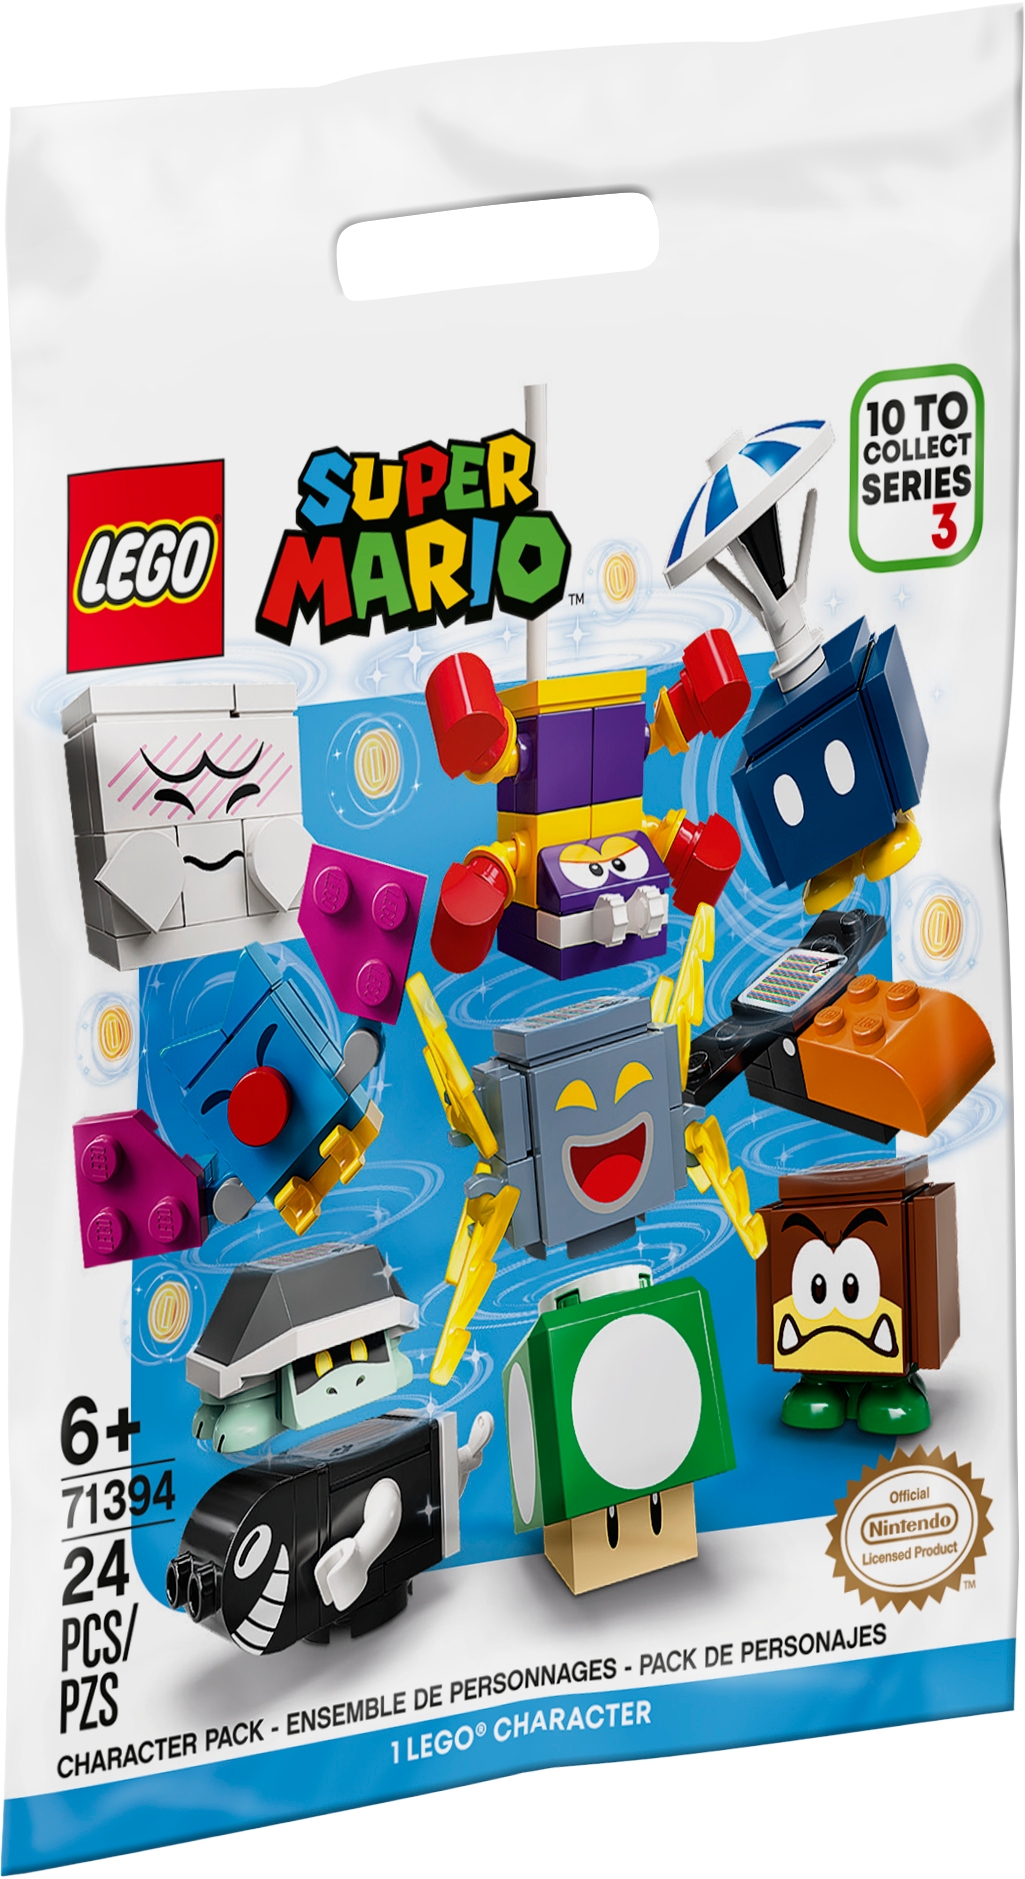 Character Packs – Series 3 71394 | LEGO® Super Mario™ | Buy online at Official LEGO® Shop US